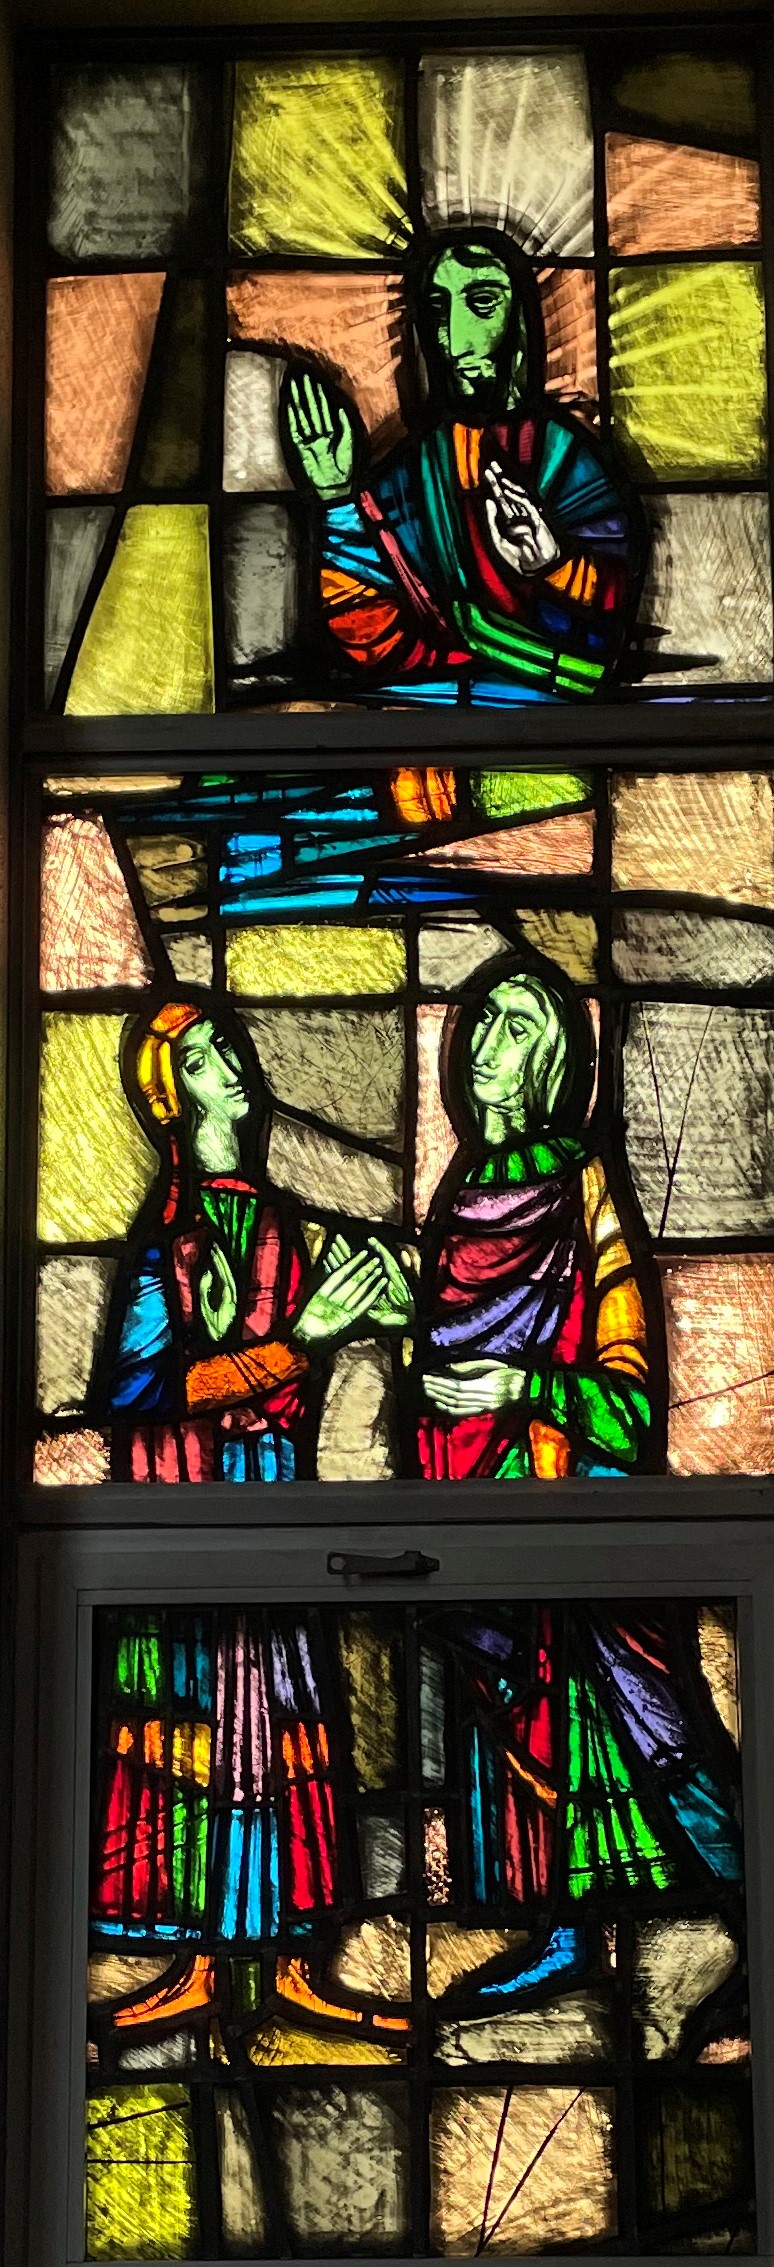 Picture of stained glass window showing a wedding